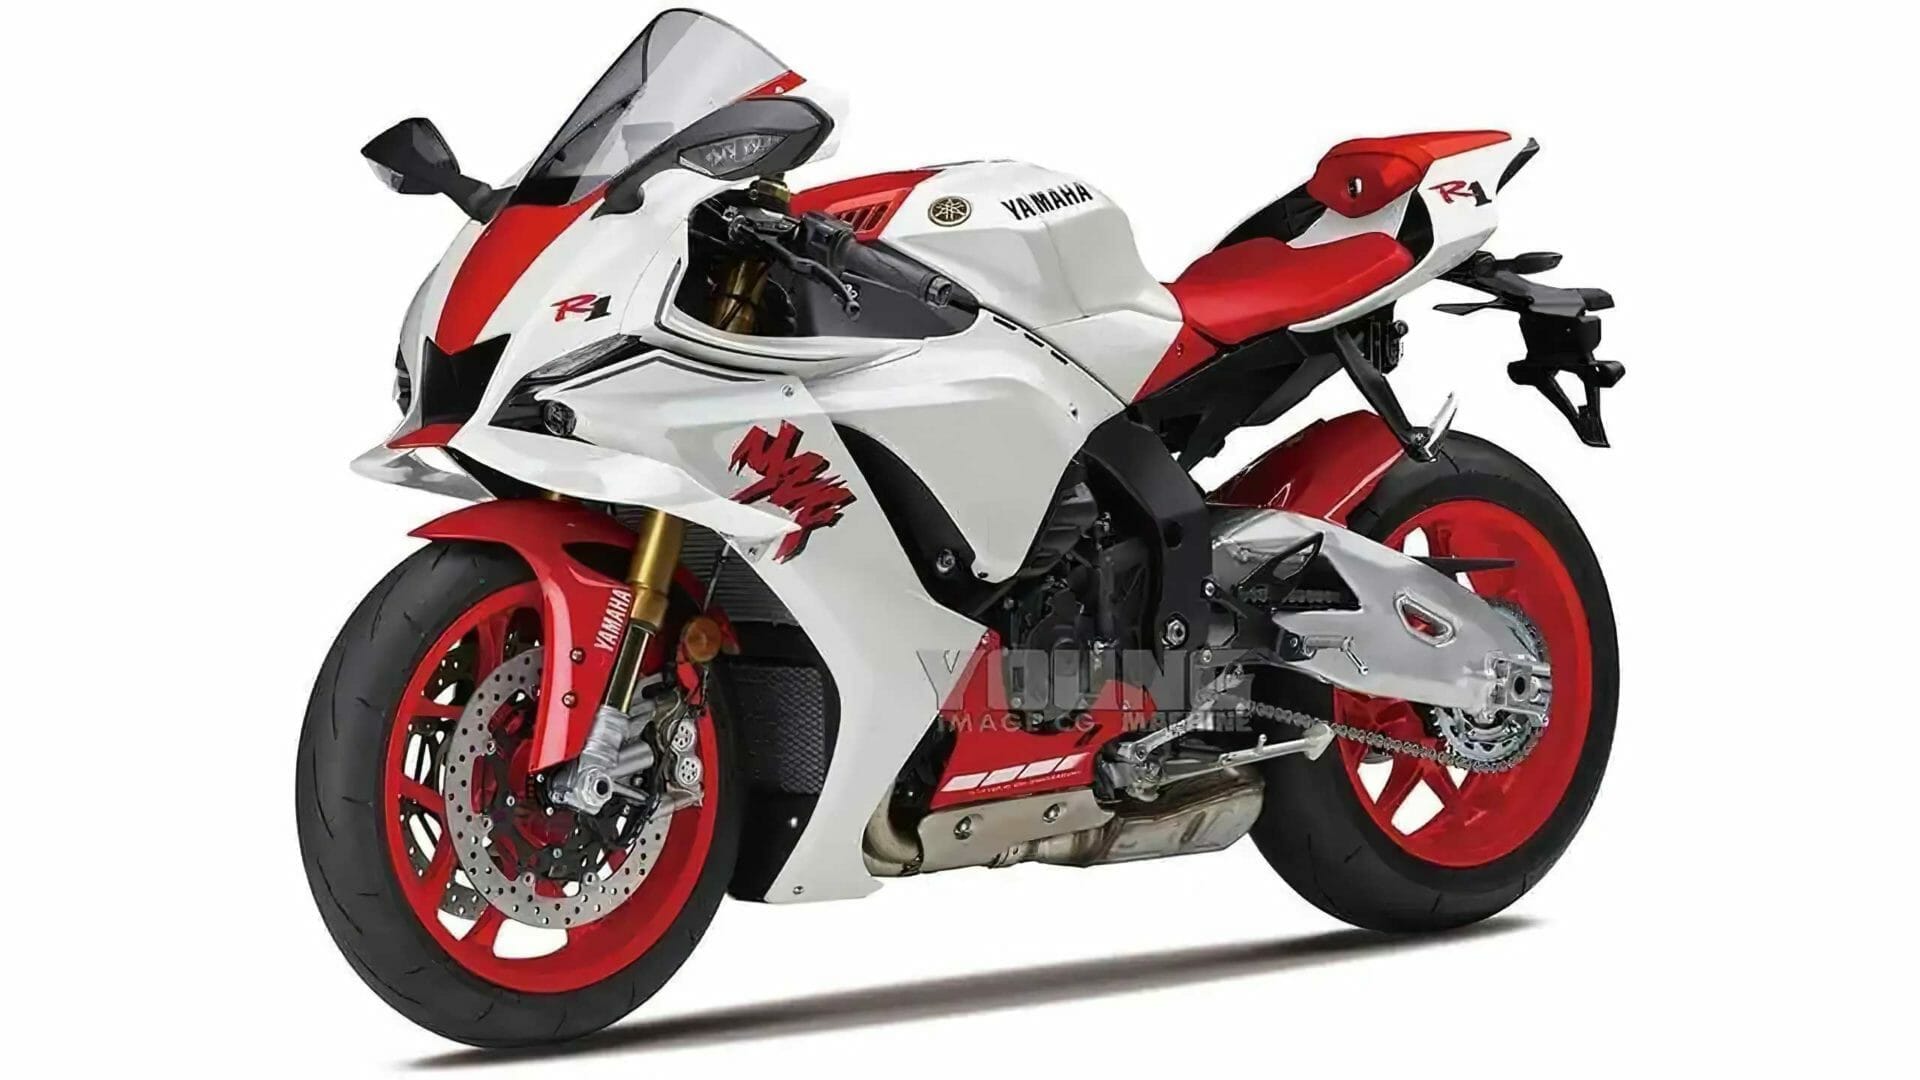 Upgraded Yamaha R1 for the 25th anniversary or new R1? - MOTORCYCLES.NEWS